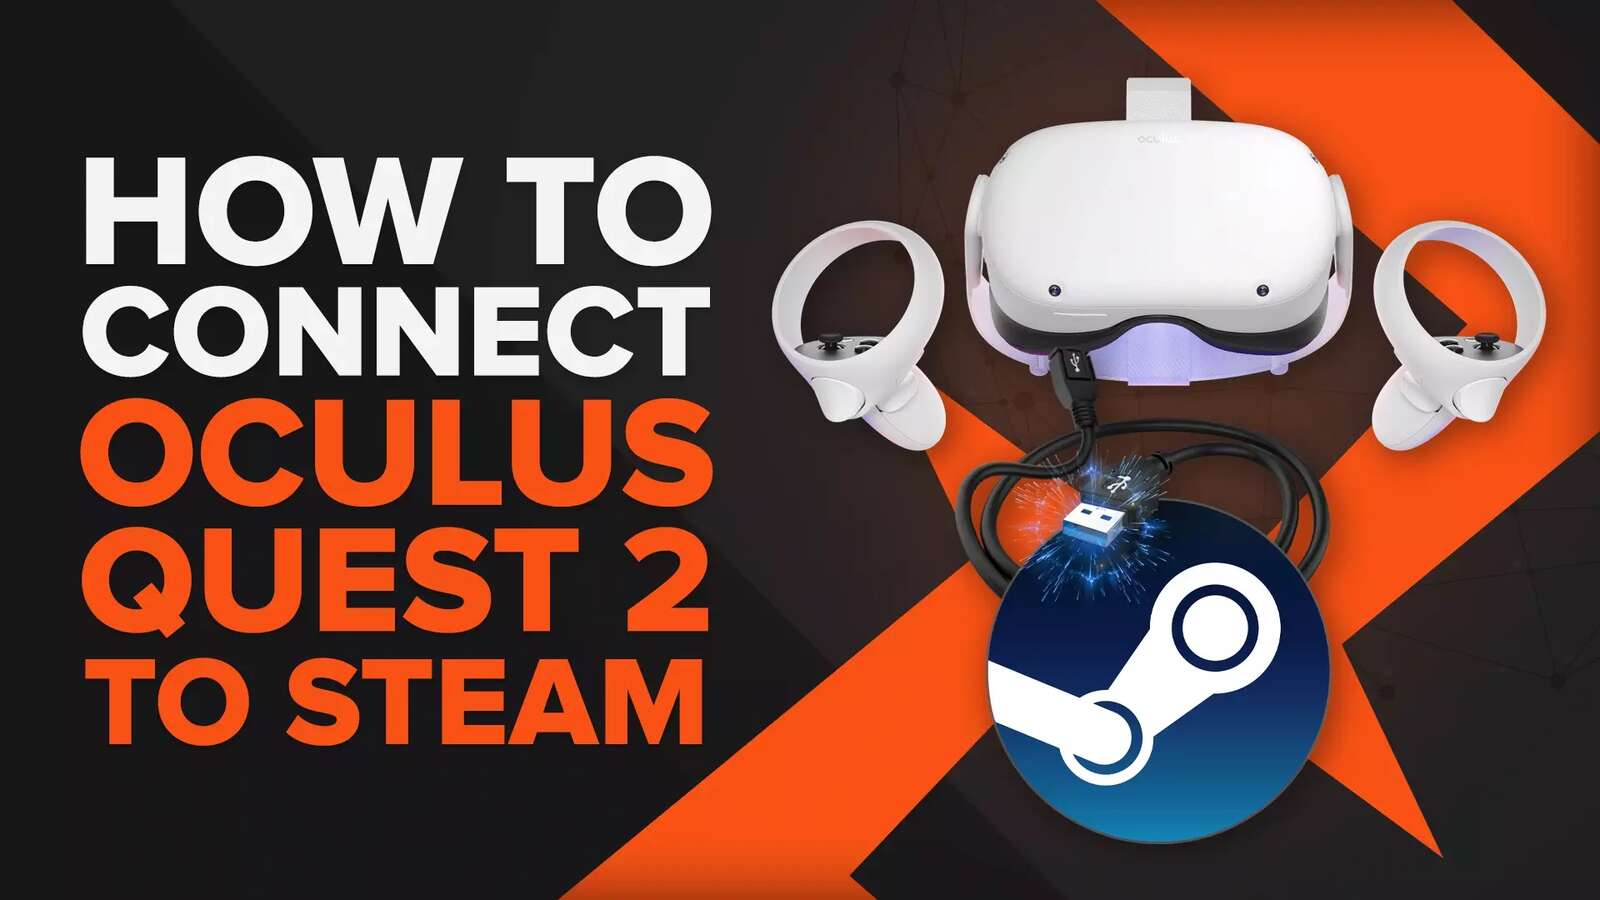 How to Quickly Connect Your Oculus Quest 2 To Steam